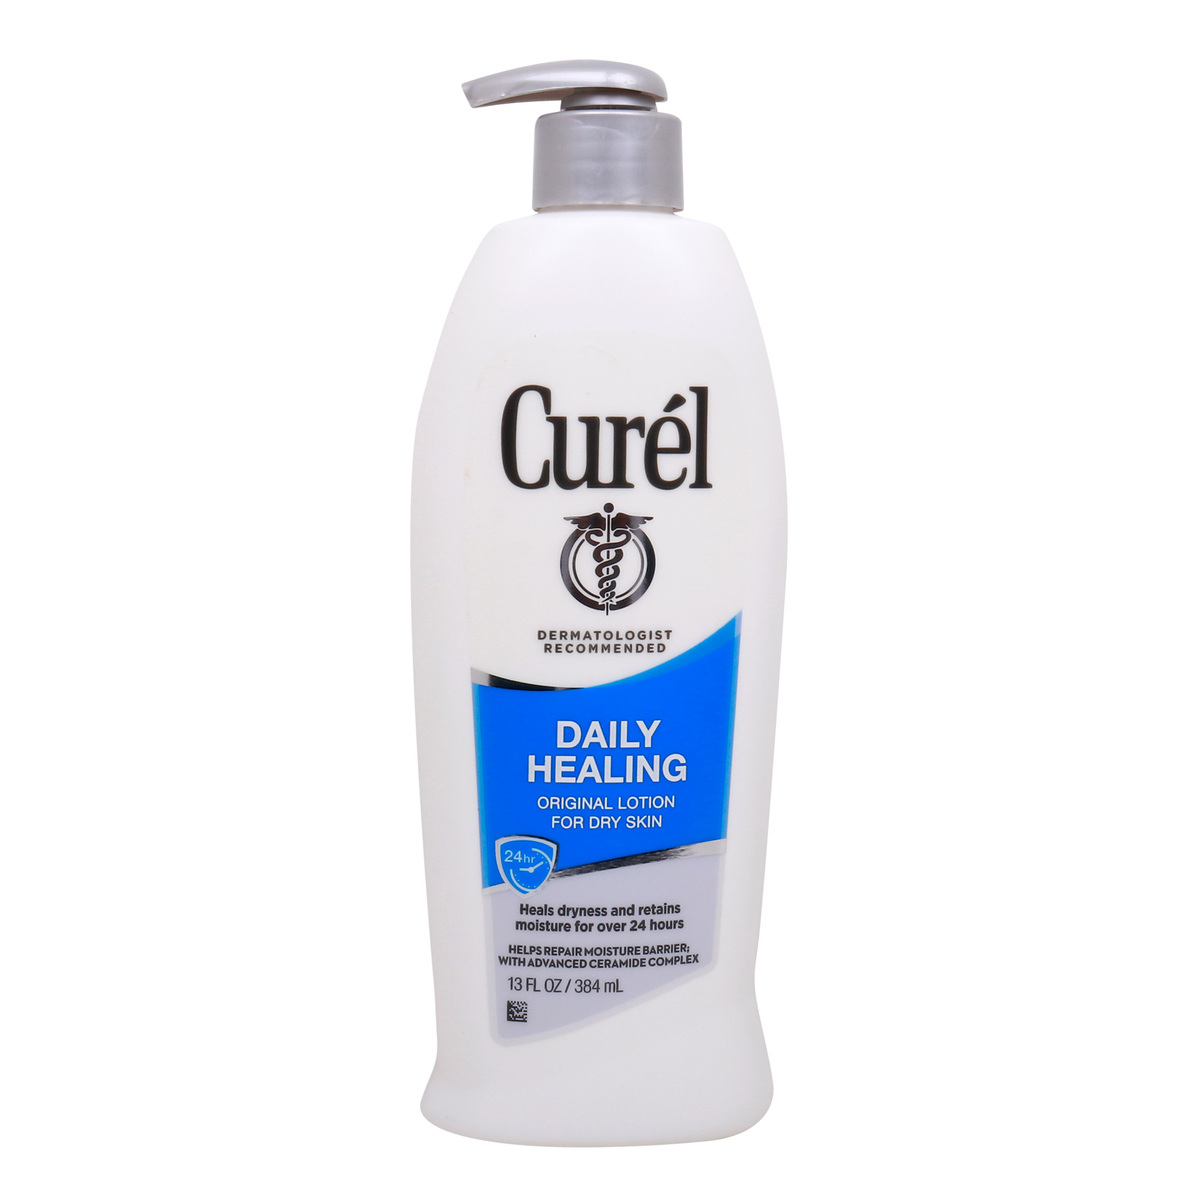 Curel Daily Healing Original Lotion for Dry Skin, 384 ml